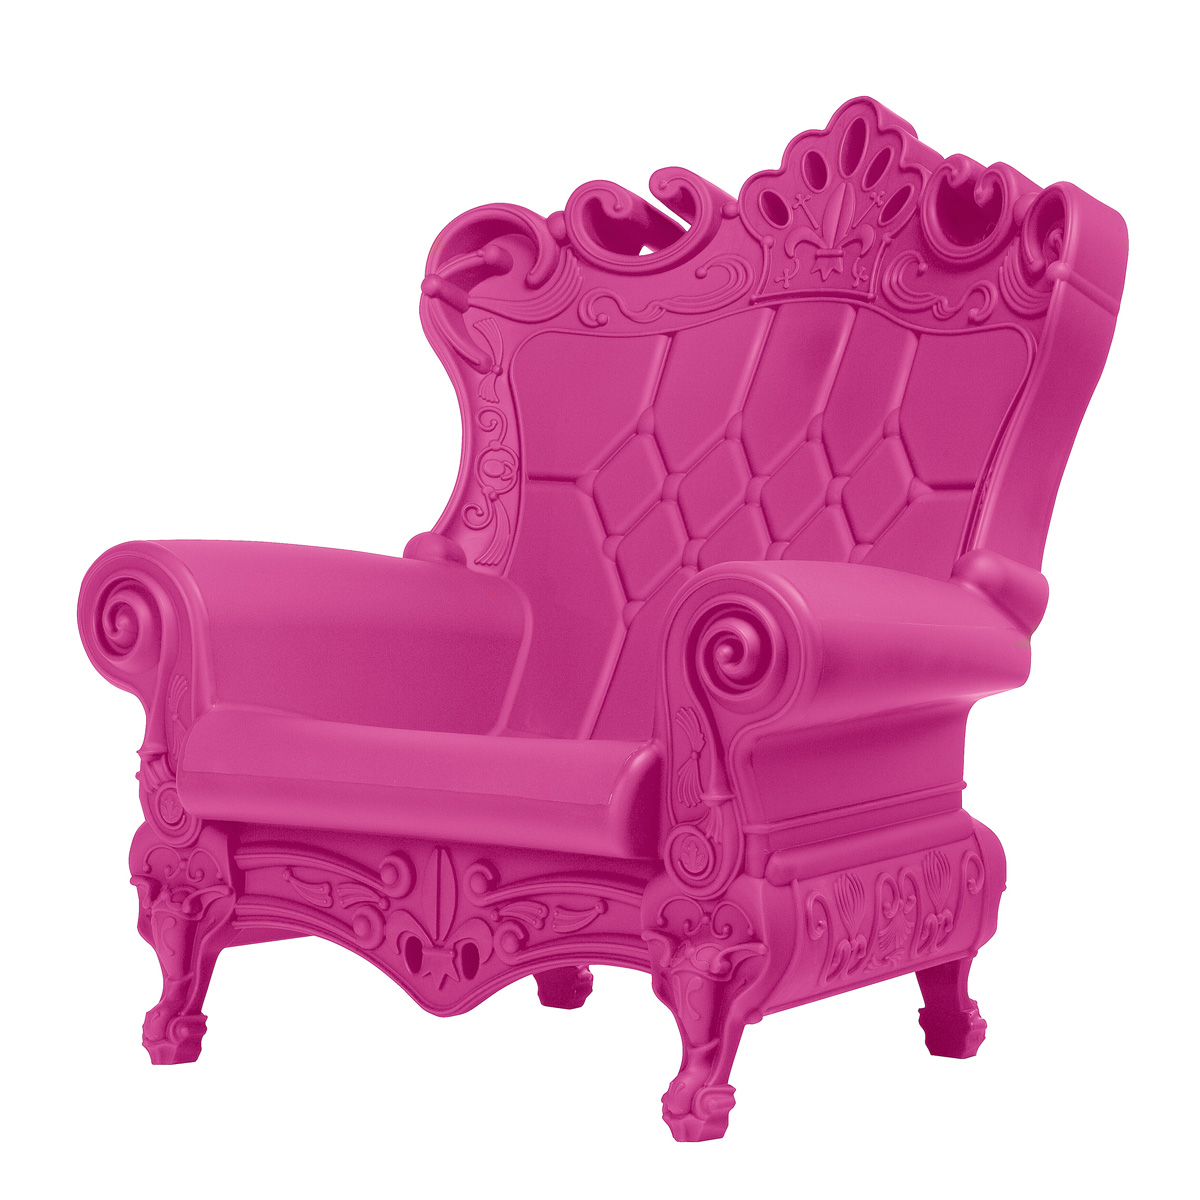 Little Queen of Love lounge chair from Slide